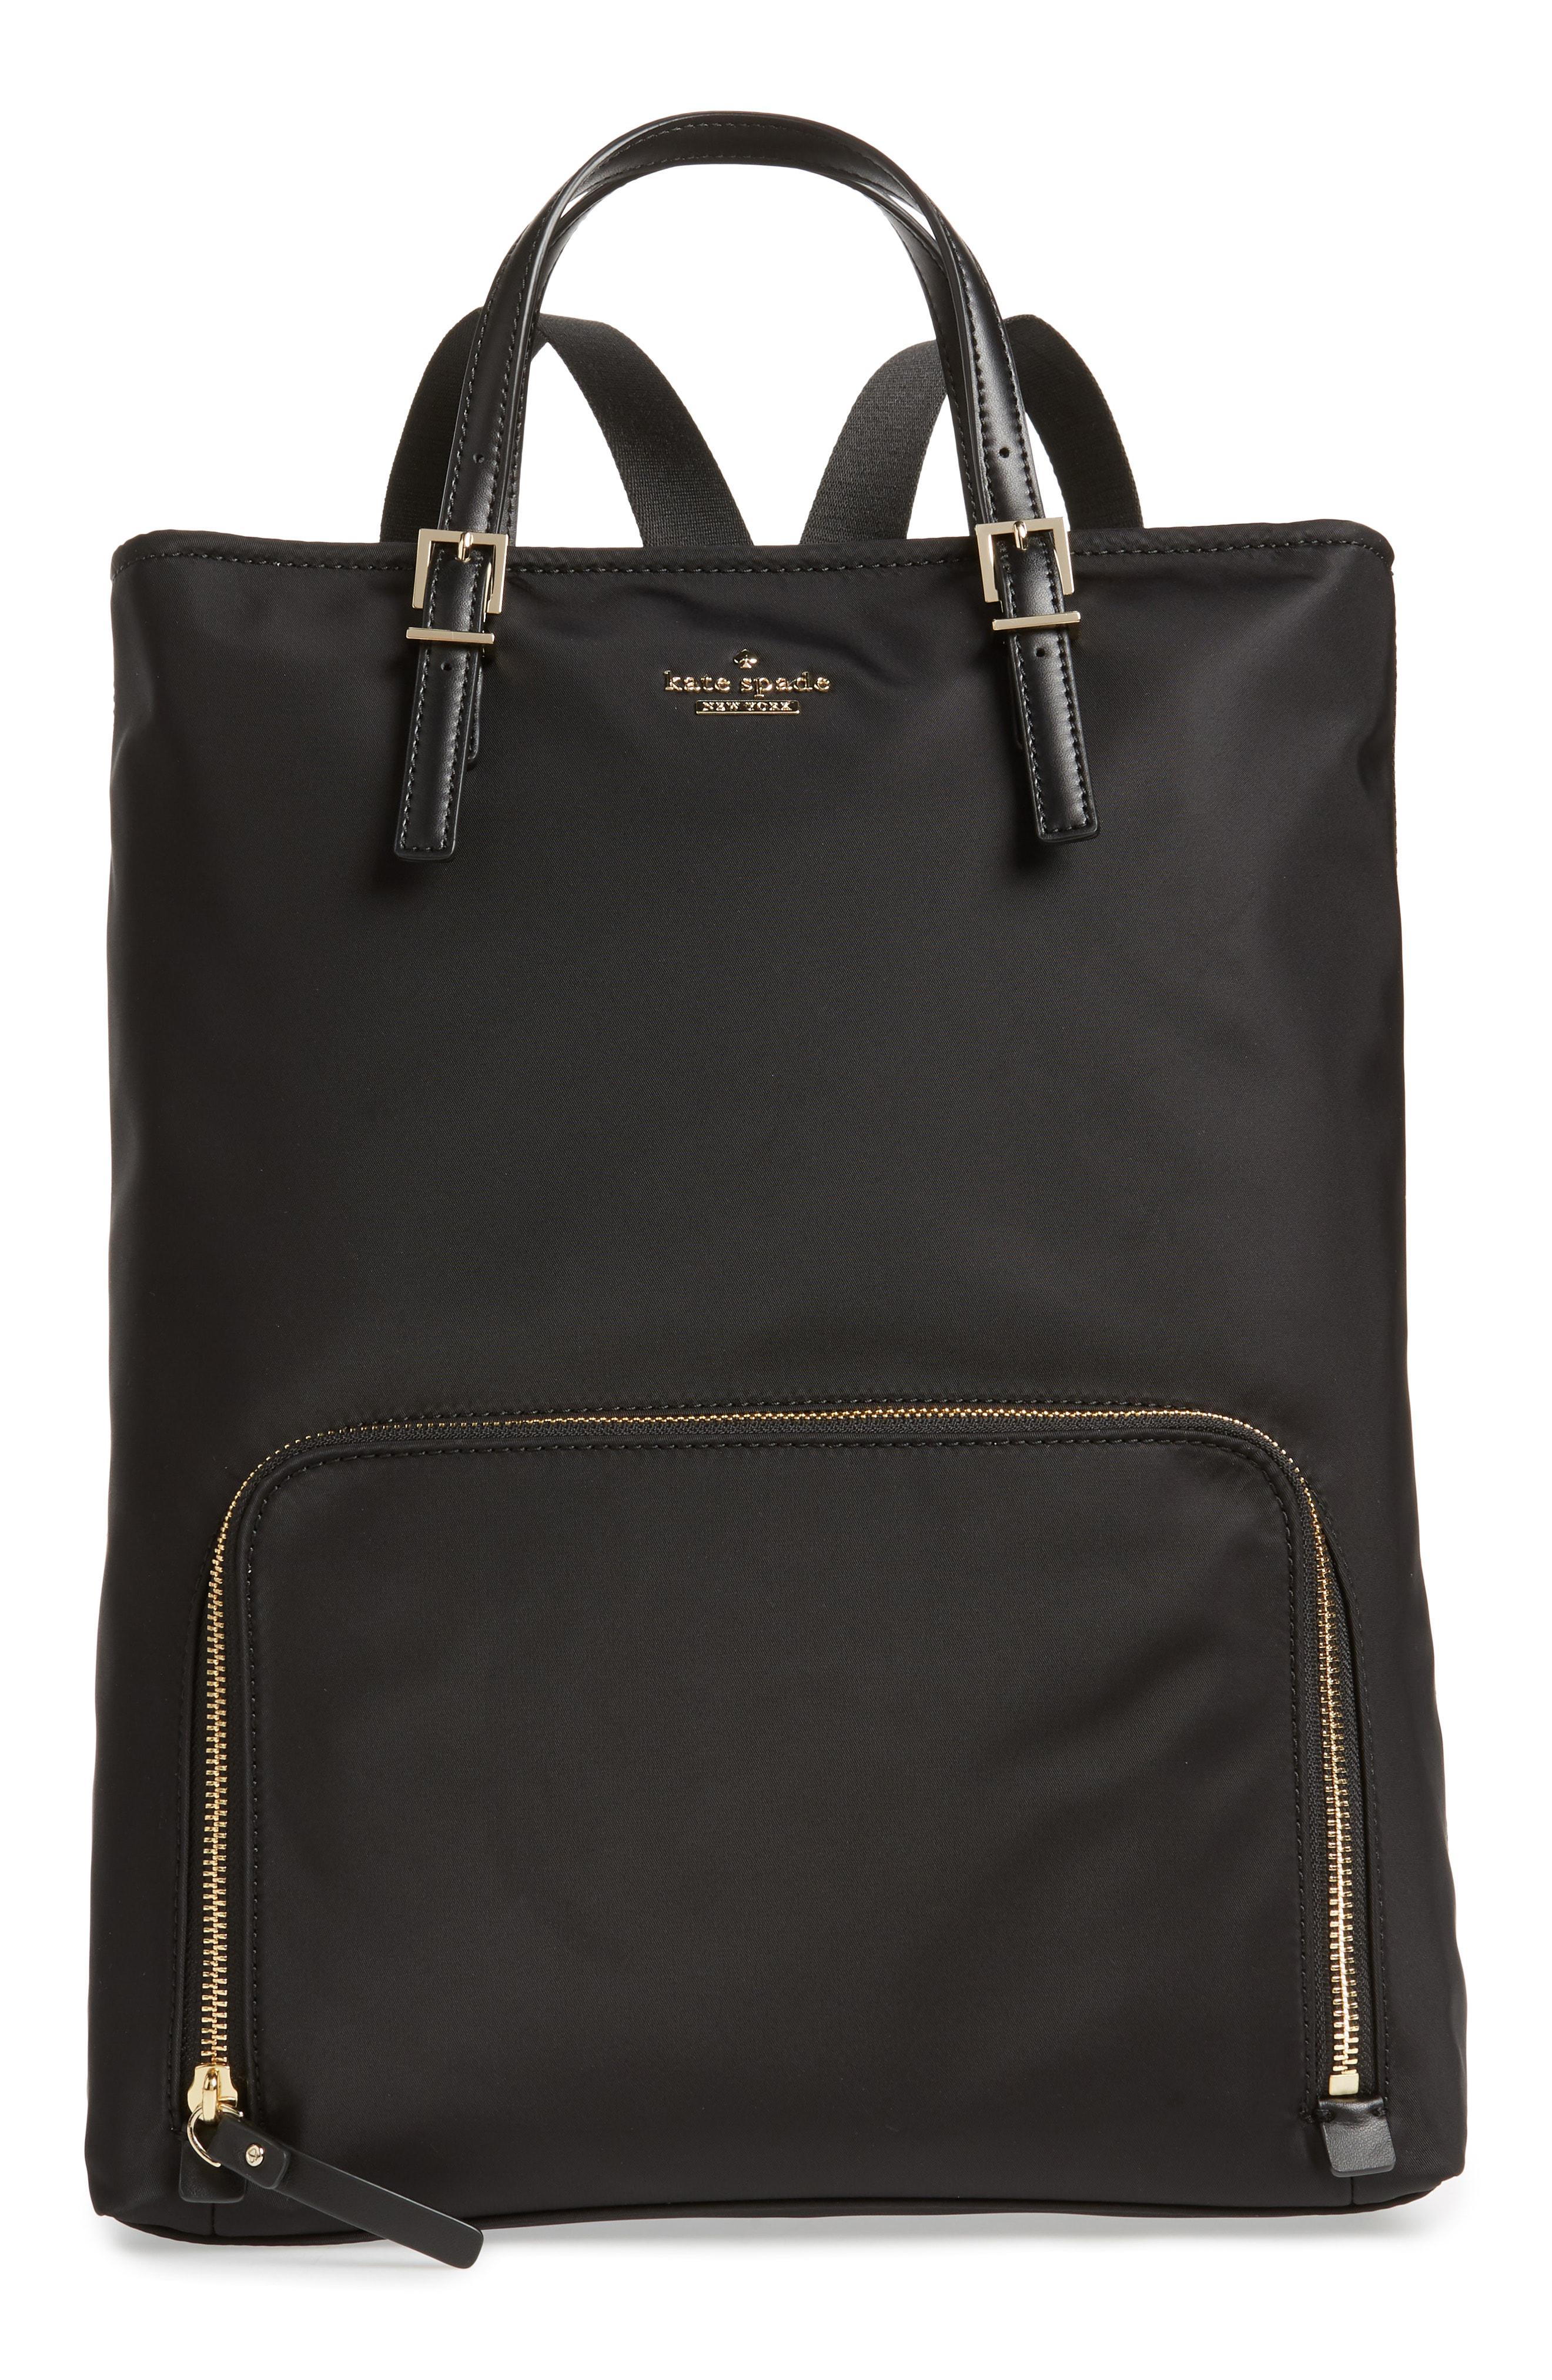 Kate Spade Synthetic Convertible Nylon Backpack in Black/Gold (Black) - Lyst